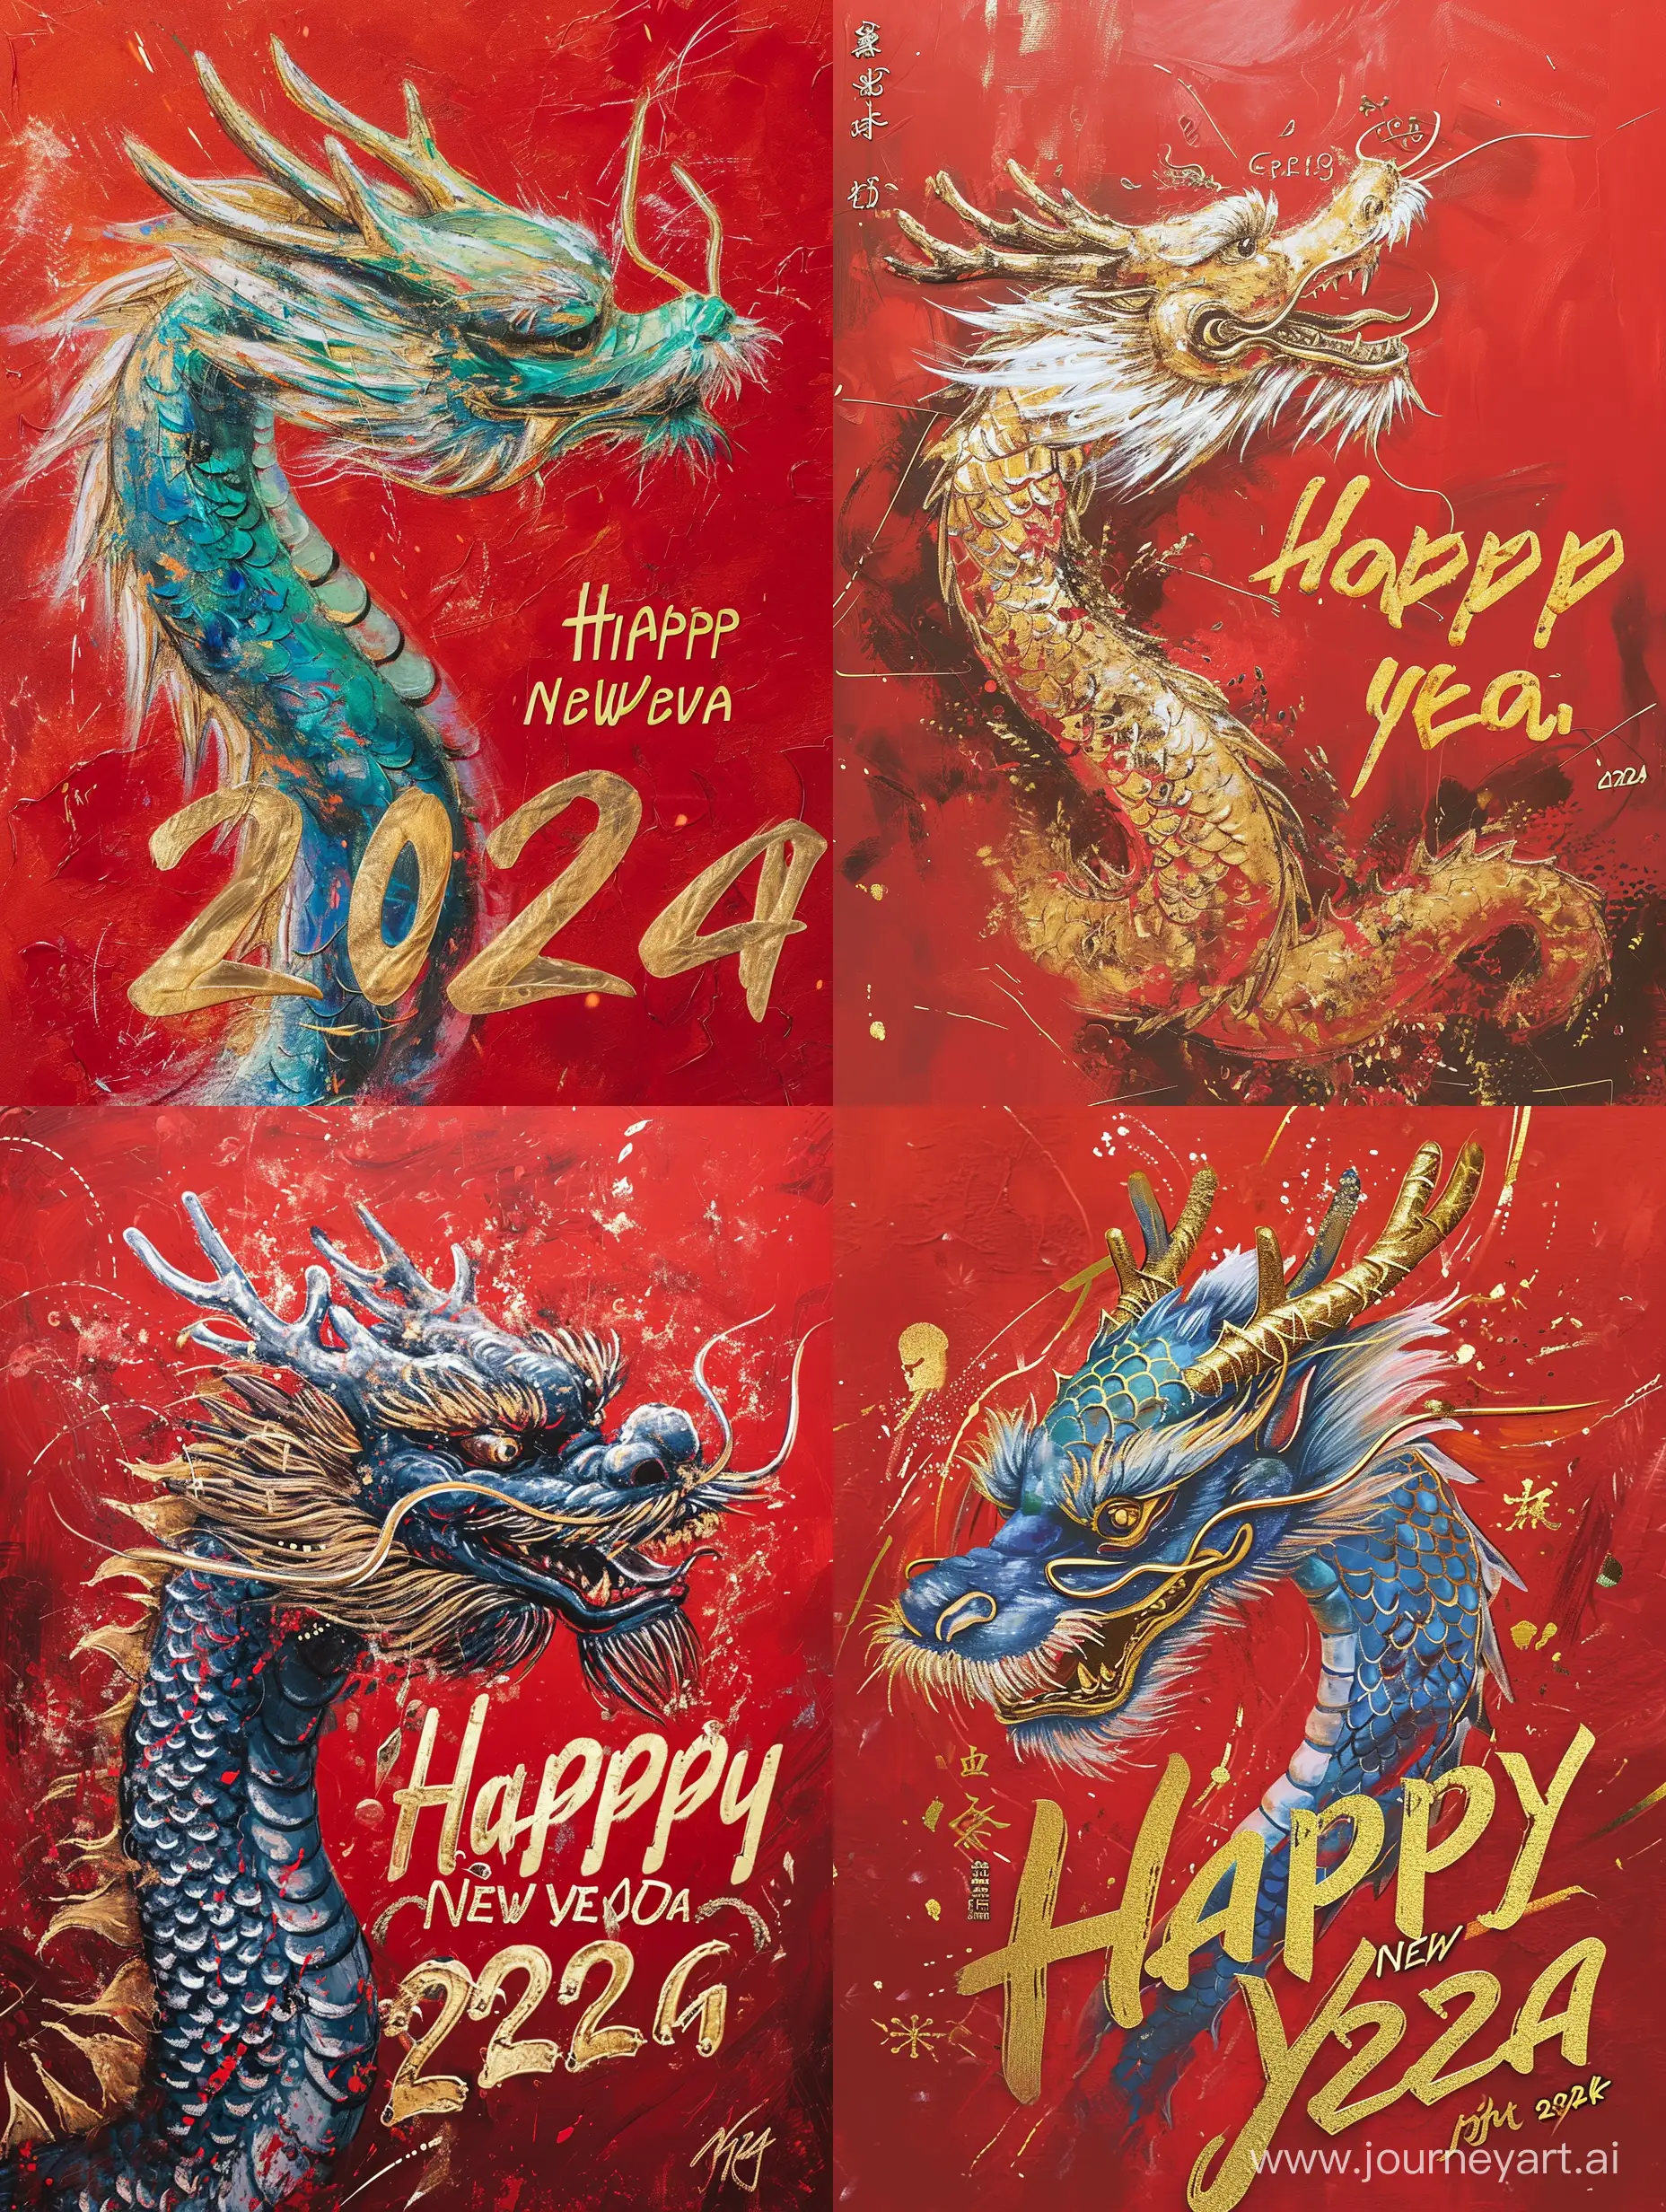 /imagine
On a red background, a Chinese dragon is painted and "Happy New Year" is written in gold.
"2024" is written in gold in the lower right corner.
--ar 3:4 --v 6.0